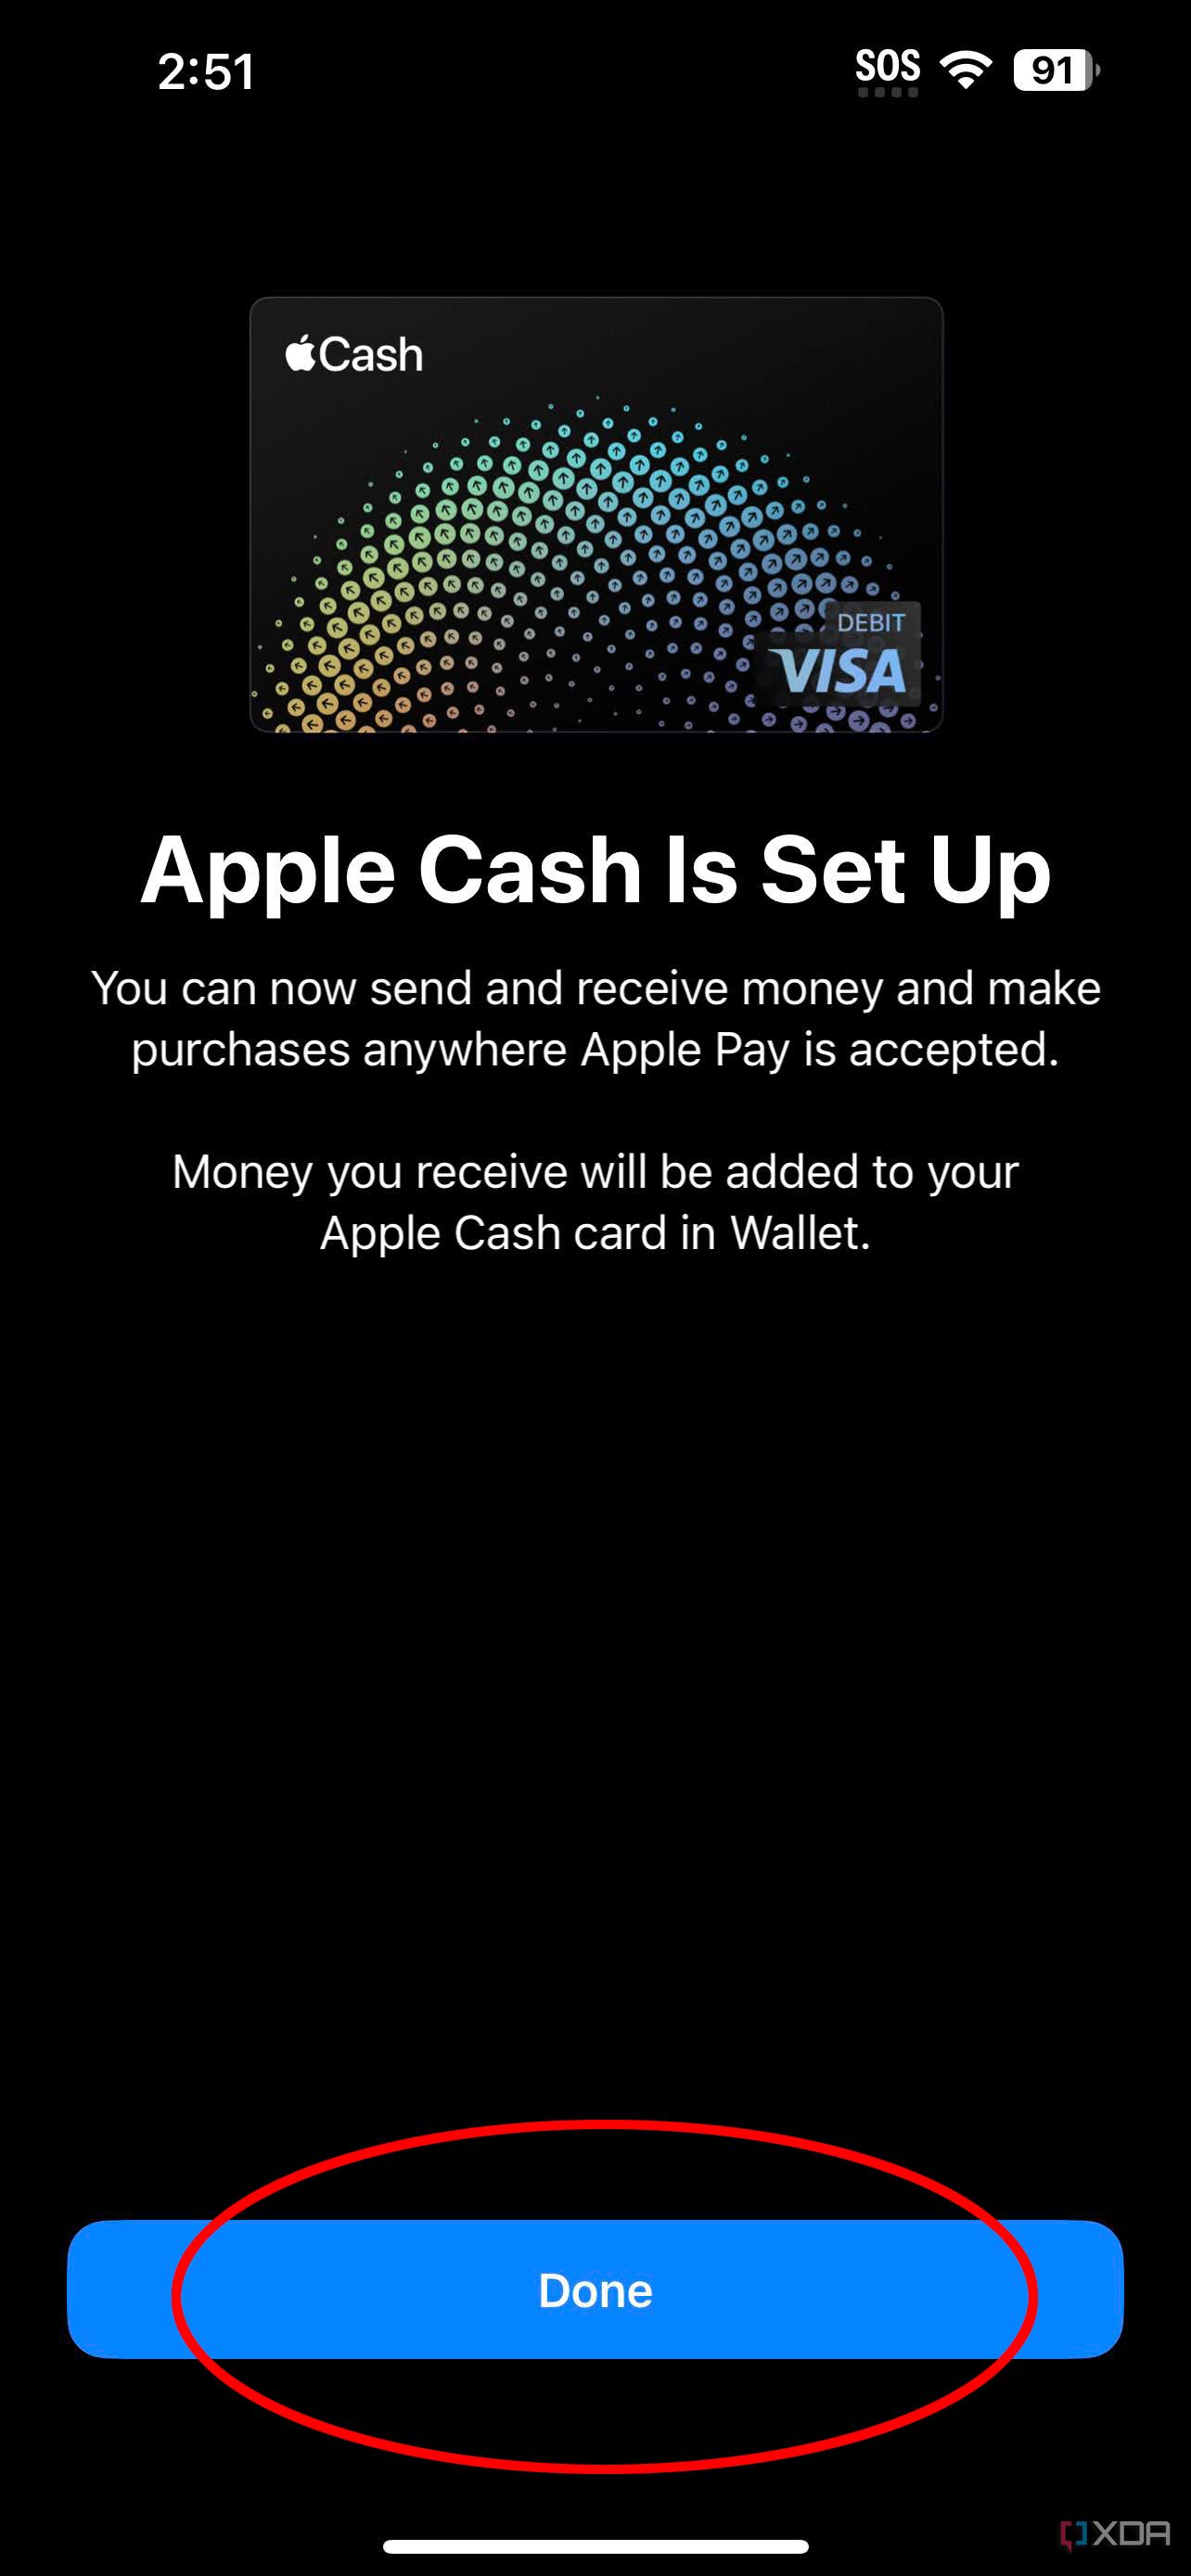 The confirmation page showing that Apple Cash has been set up.